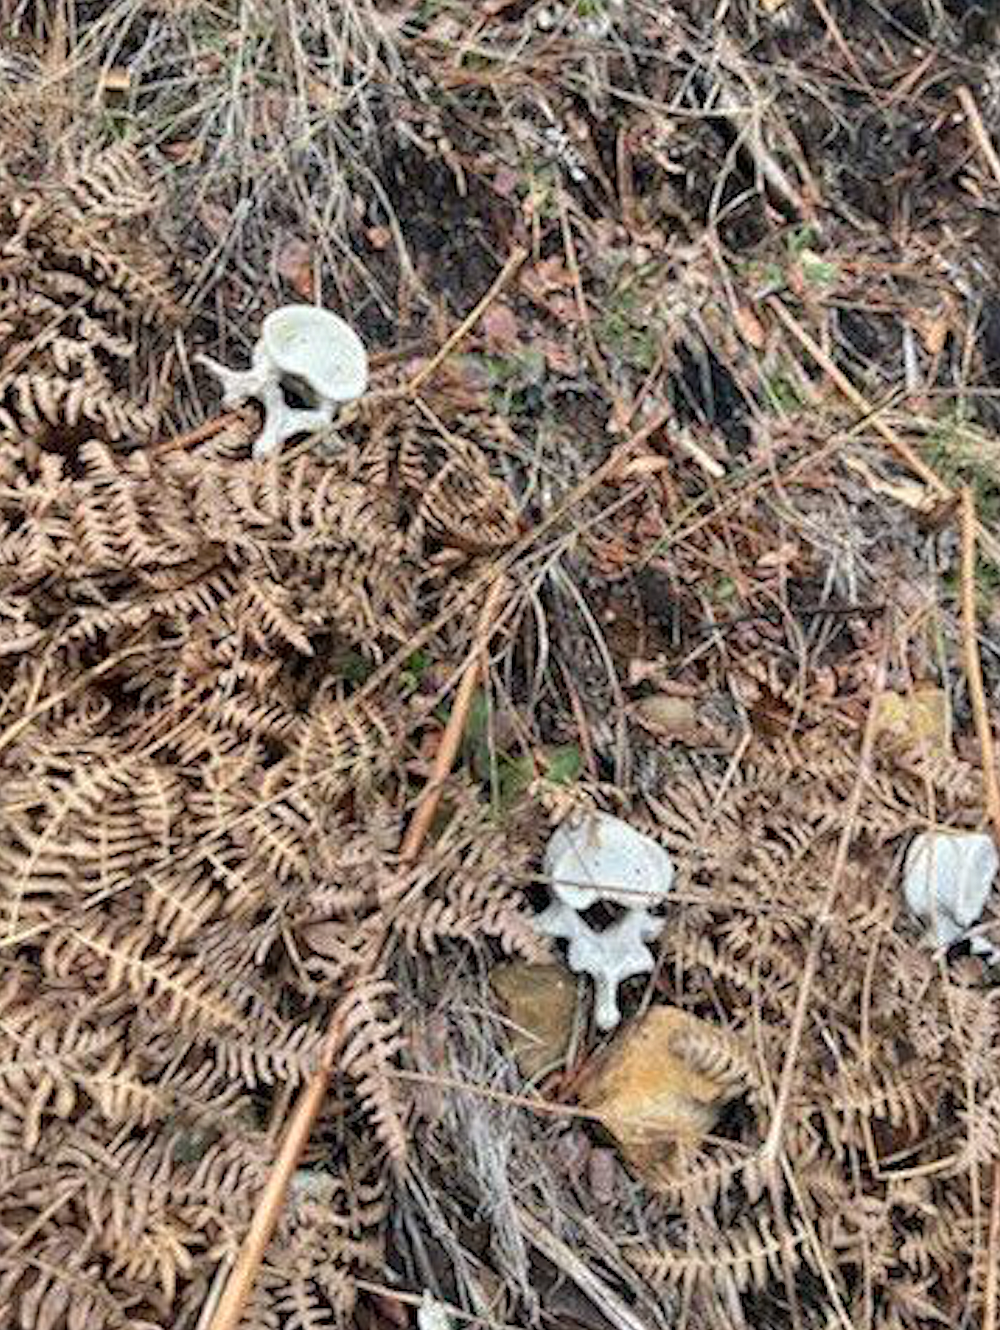 More of the 'bones' located on the hillside behind Upper 3rd Street in Kellogg.